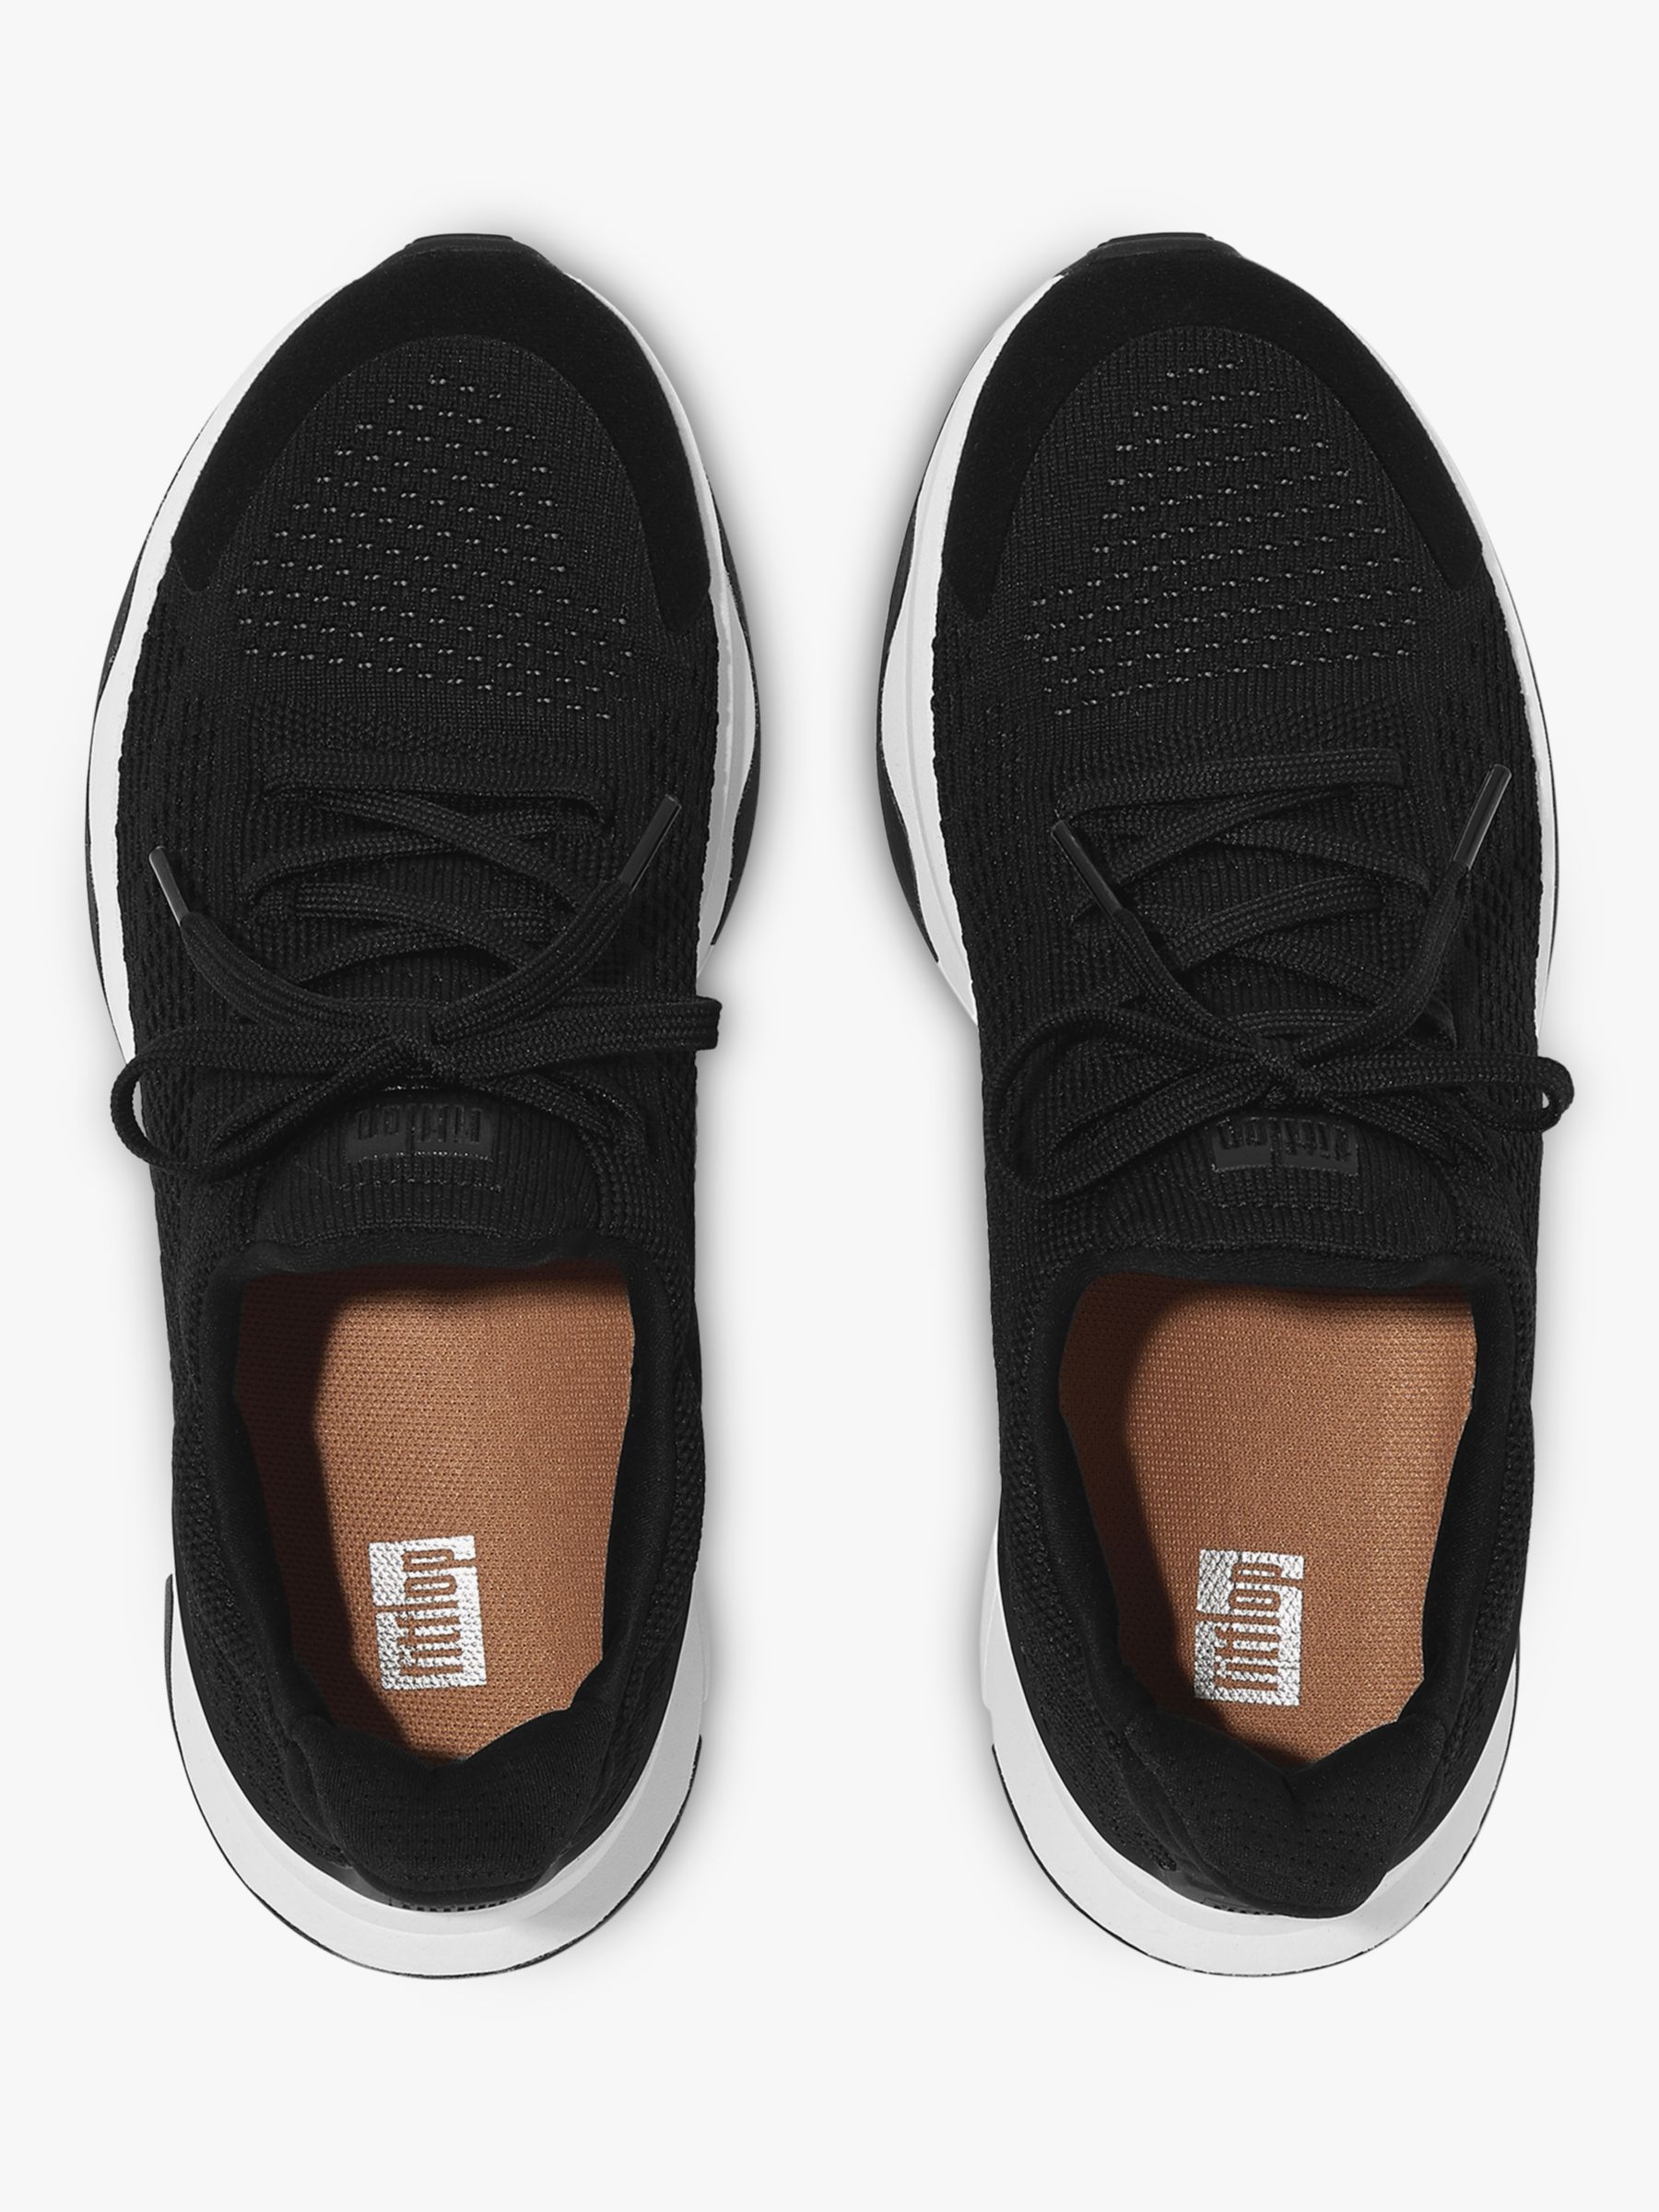 FitFlop Vitamin FFX Lace Up Trainers, Black at John Lewis & Partners